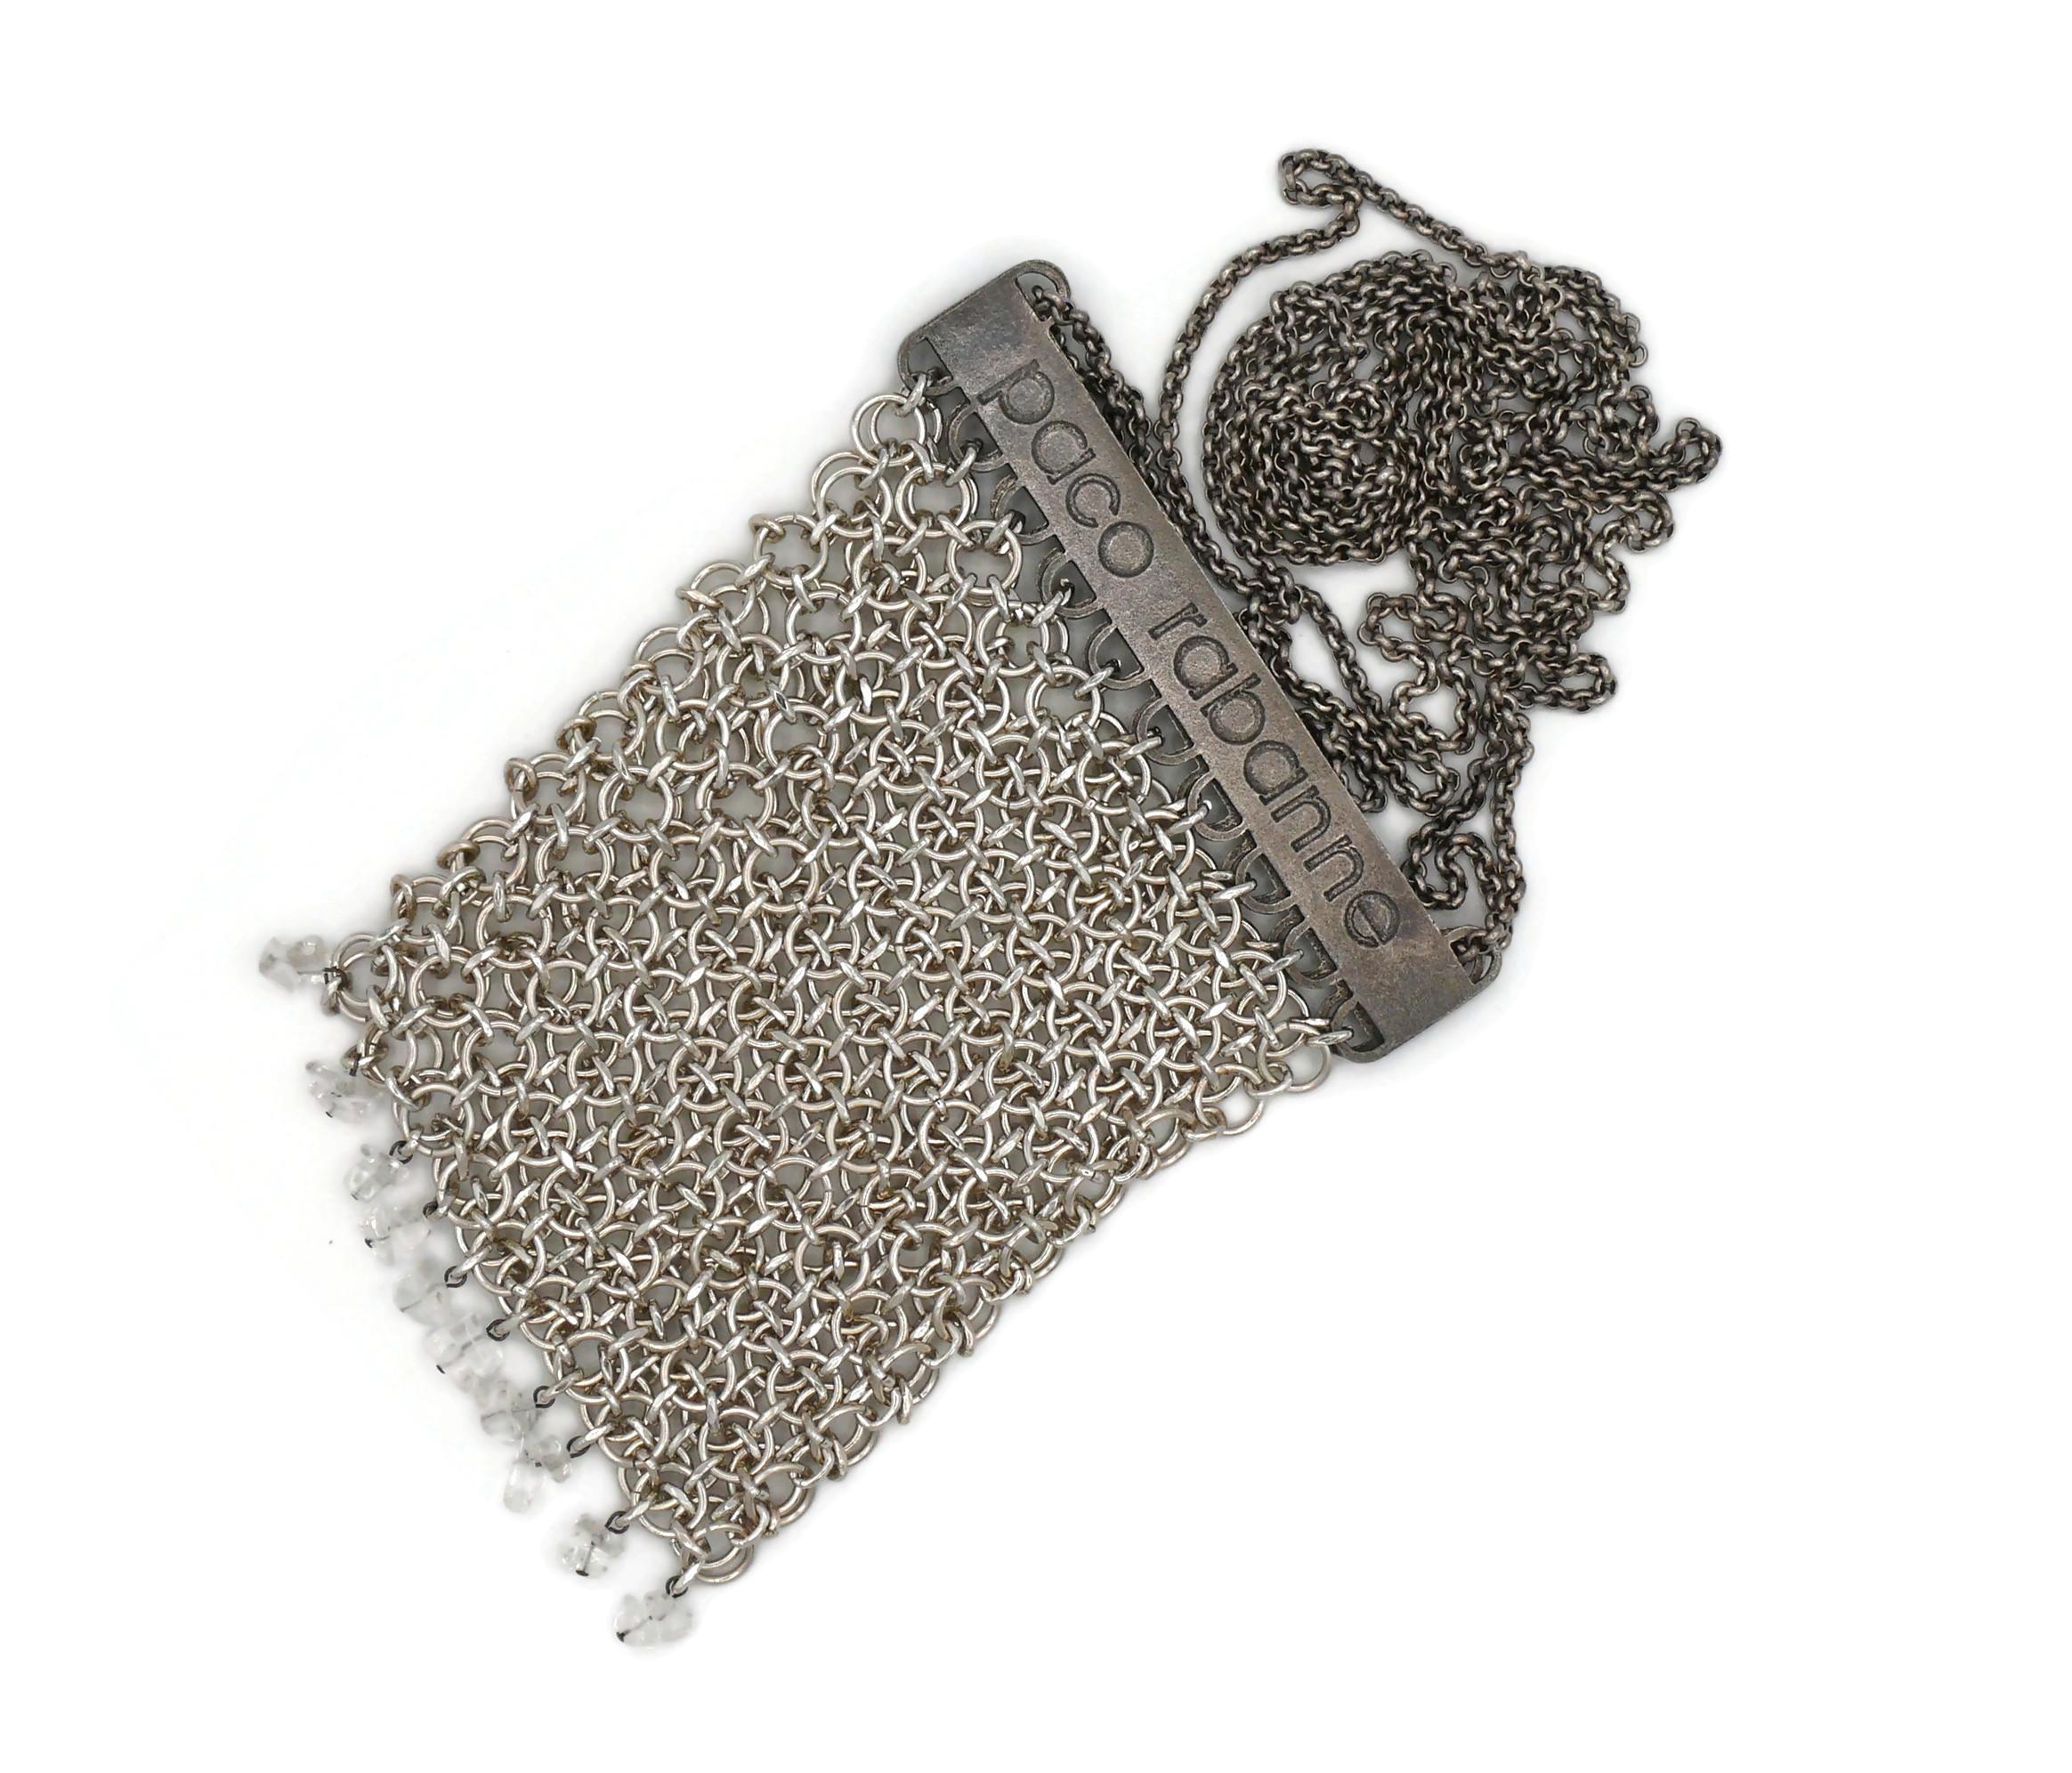 PACO RABANNE Vintage Mini Silver Tone Chainmail Messenger Bag For Sale 1